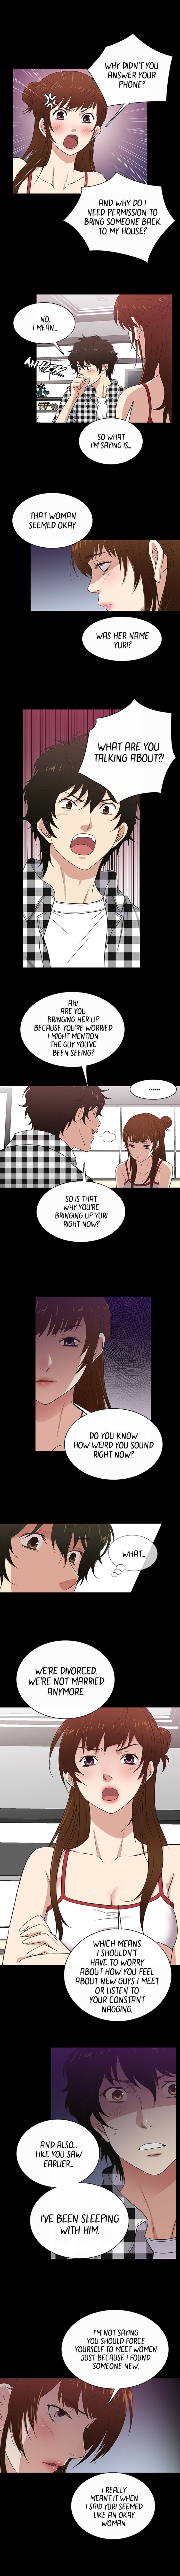 shes-back-chap-26-2